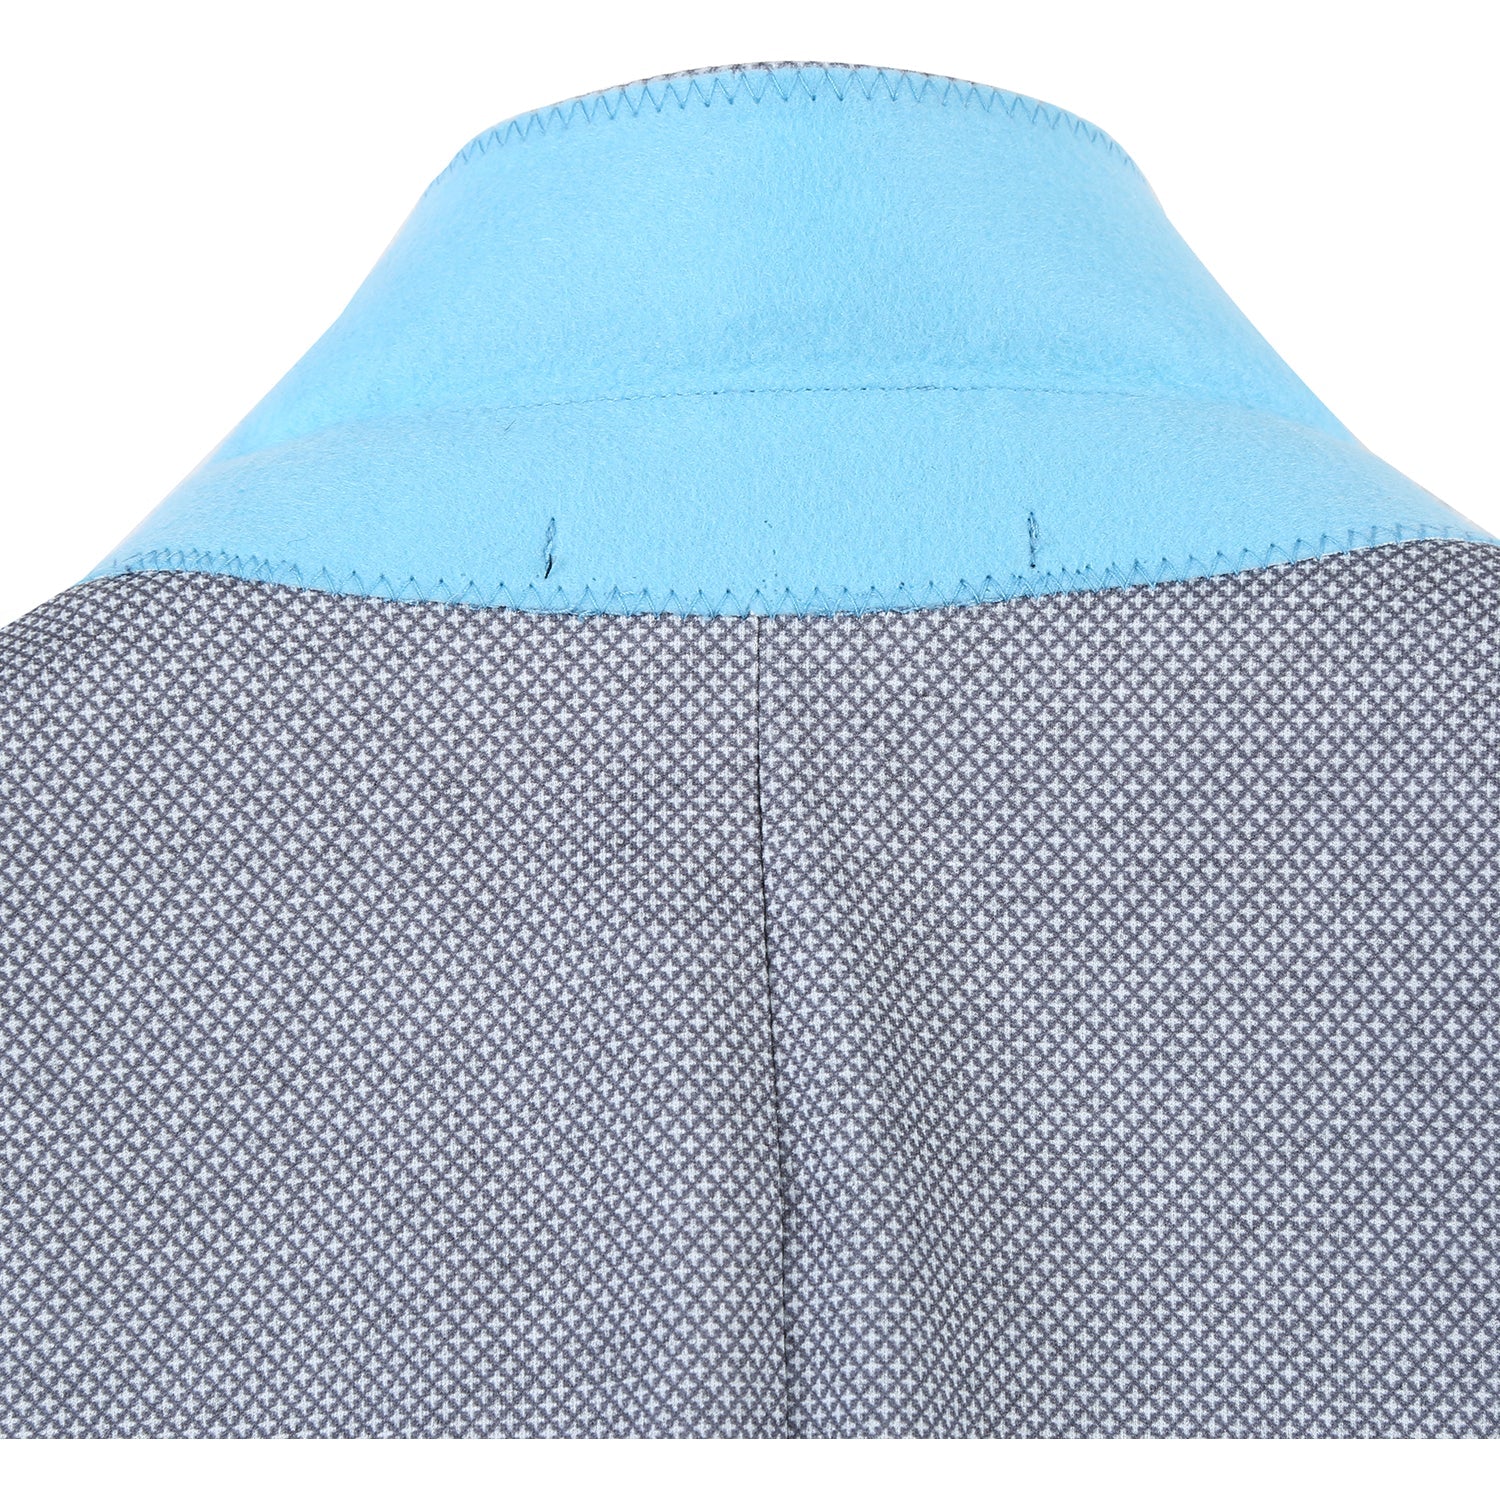 Single Breasted SLIM FIT Half Canvas Soft Jacket in Blue-Grey (Short, Regular, and Long Available) by Pelago